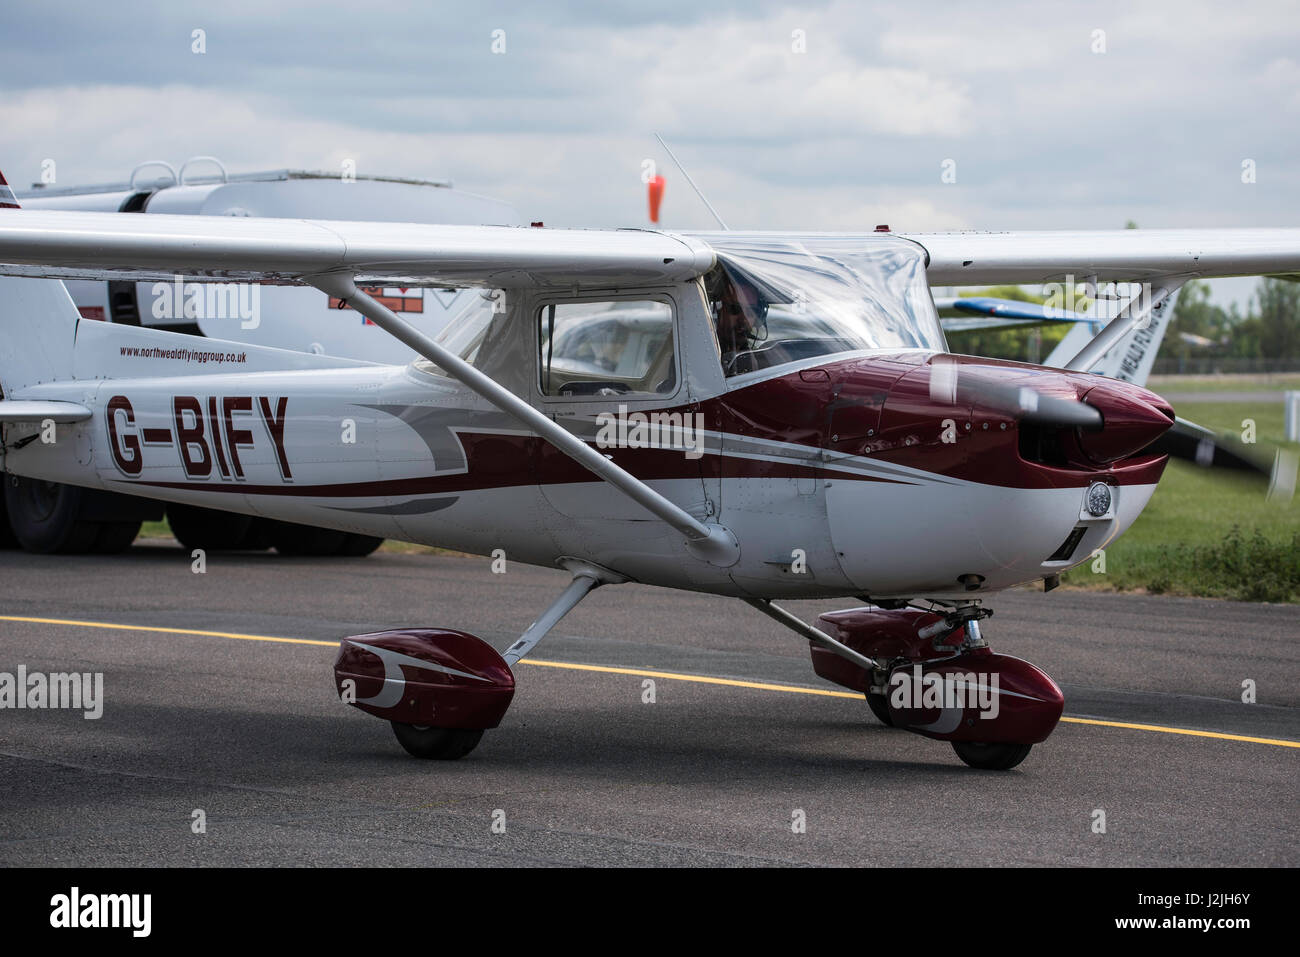 Cessna F.150-L (G-BIFY), lands at North Weald airfield Stock Photo